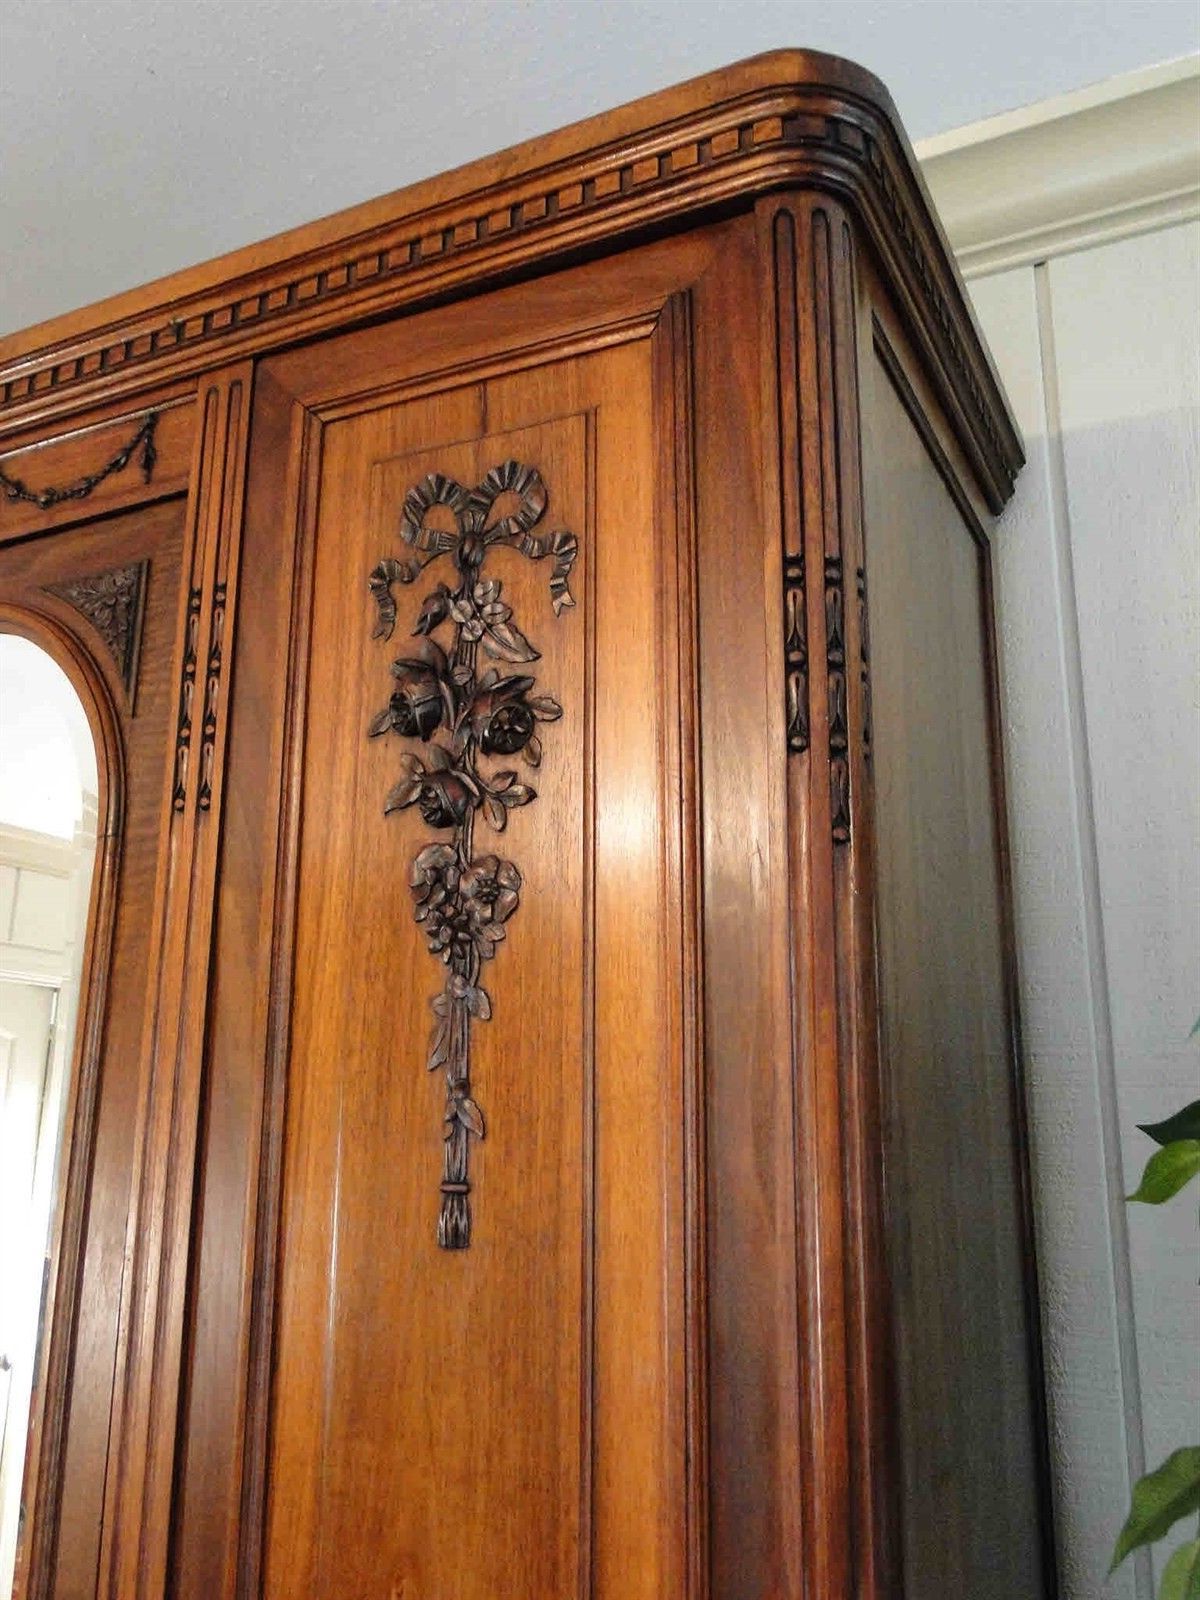 Antique French Armoire Wardrobe Large Beveled Mirror 3 Door Walnut Floral  Carved Throughout Armoire French Wardrobes (View 13 of 20)